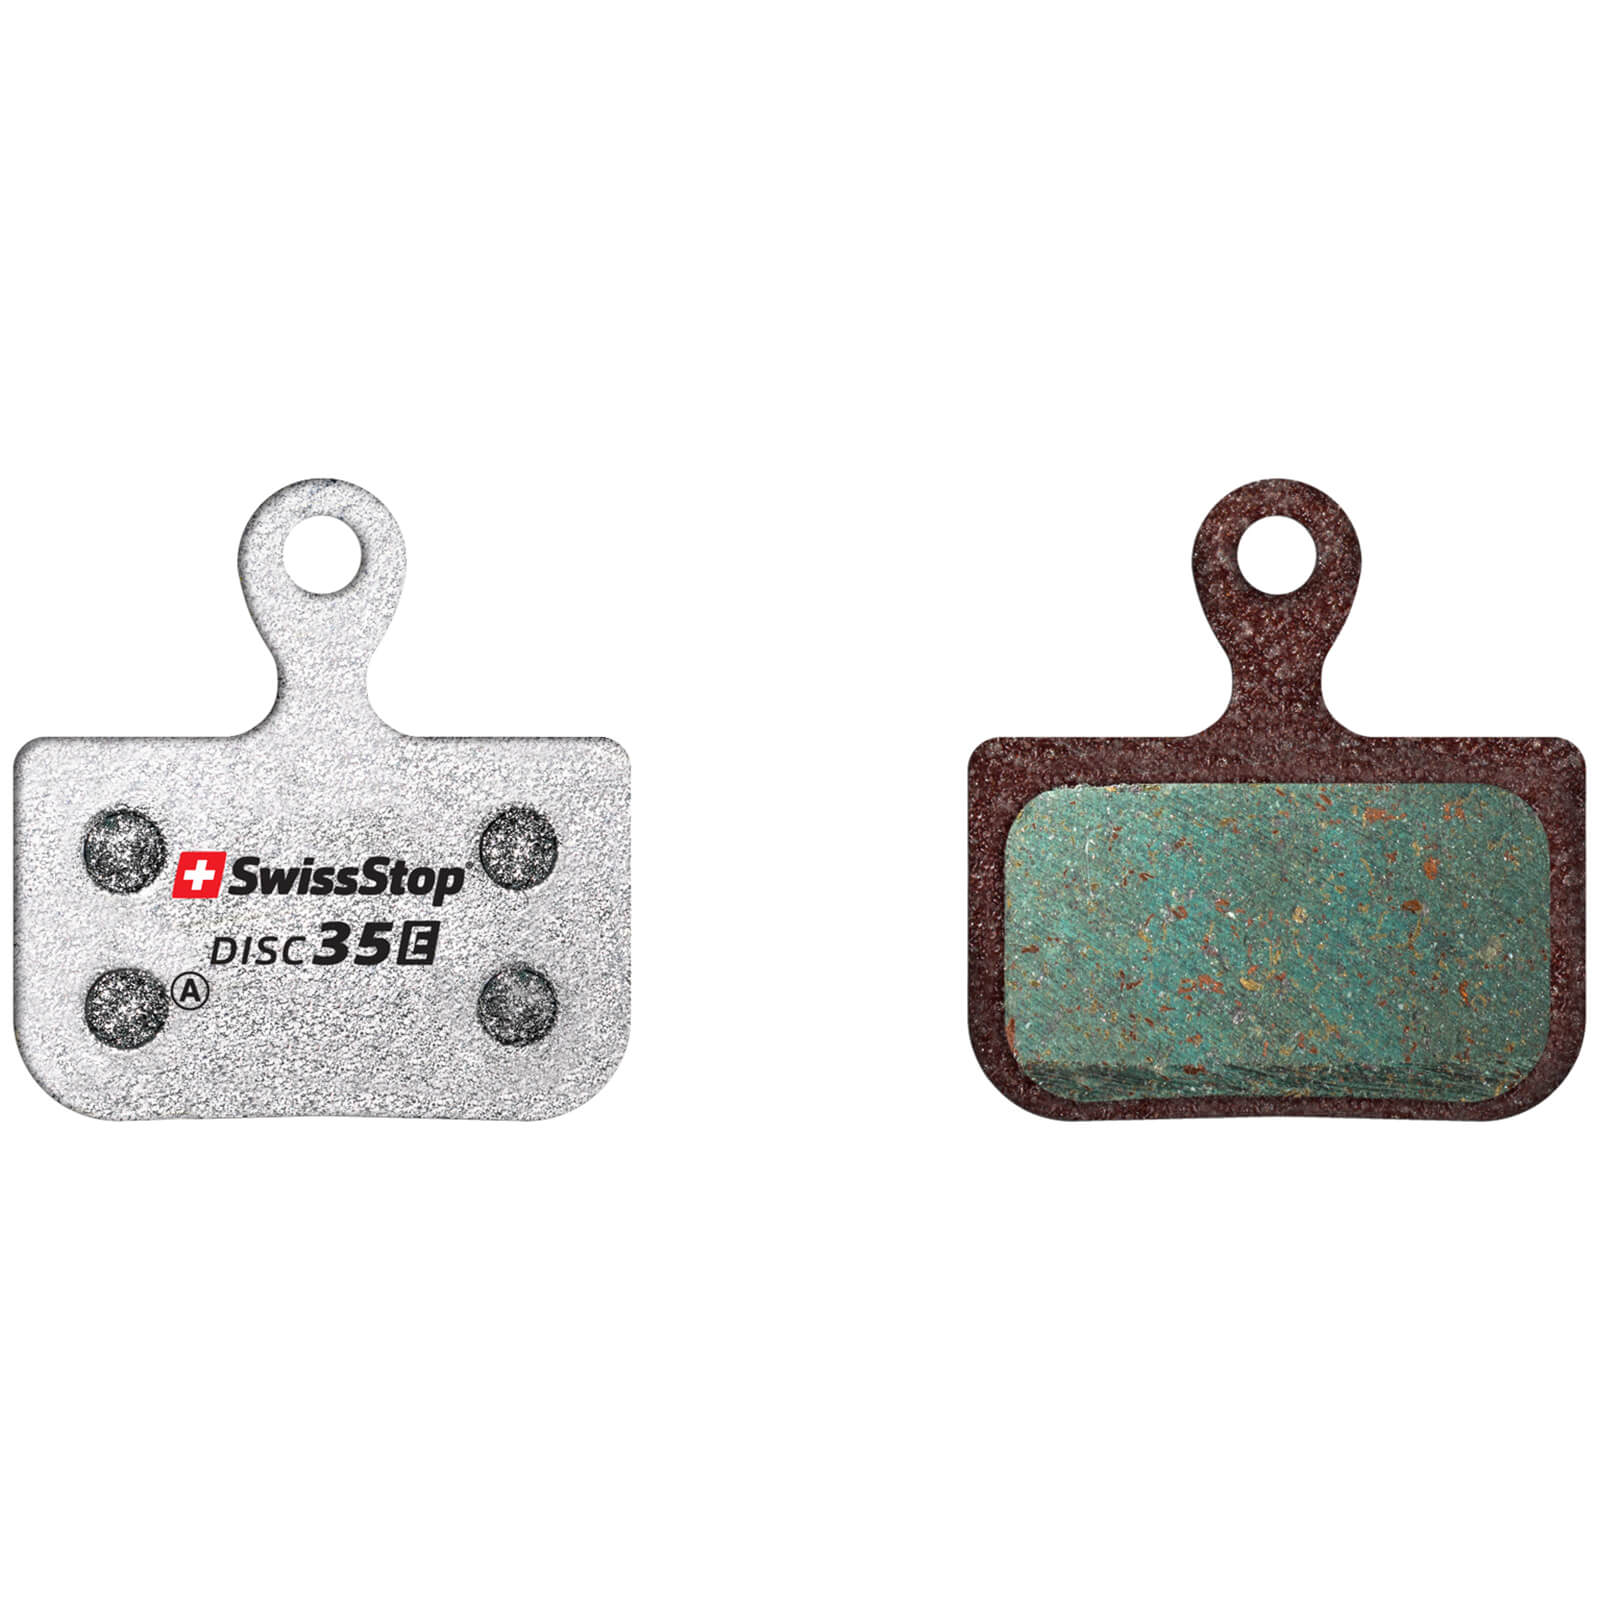 Image of SwissStop Disc 28 Endurance Road Disc Brake Pads - Disc E Compound - Organic